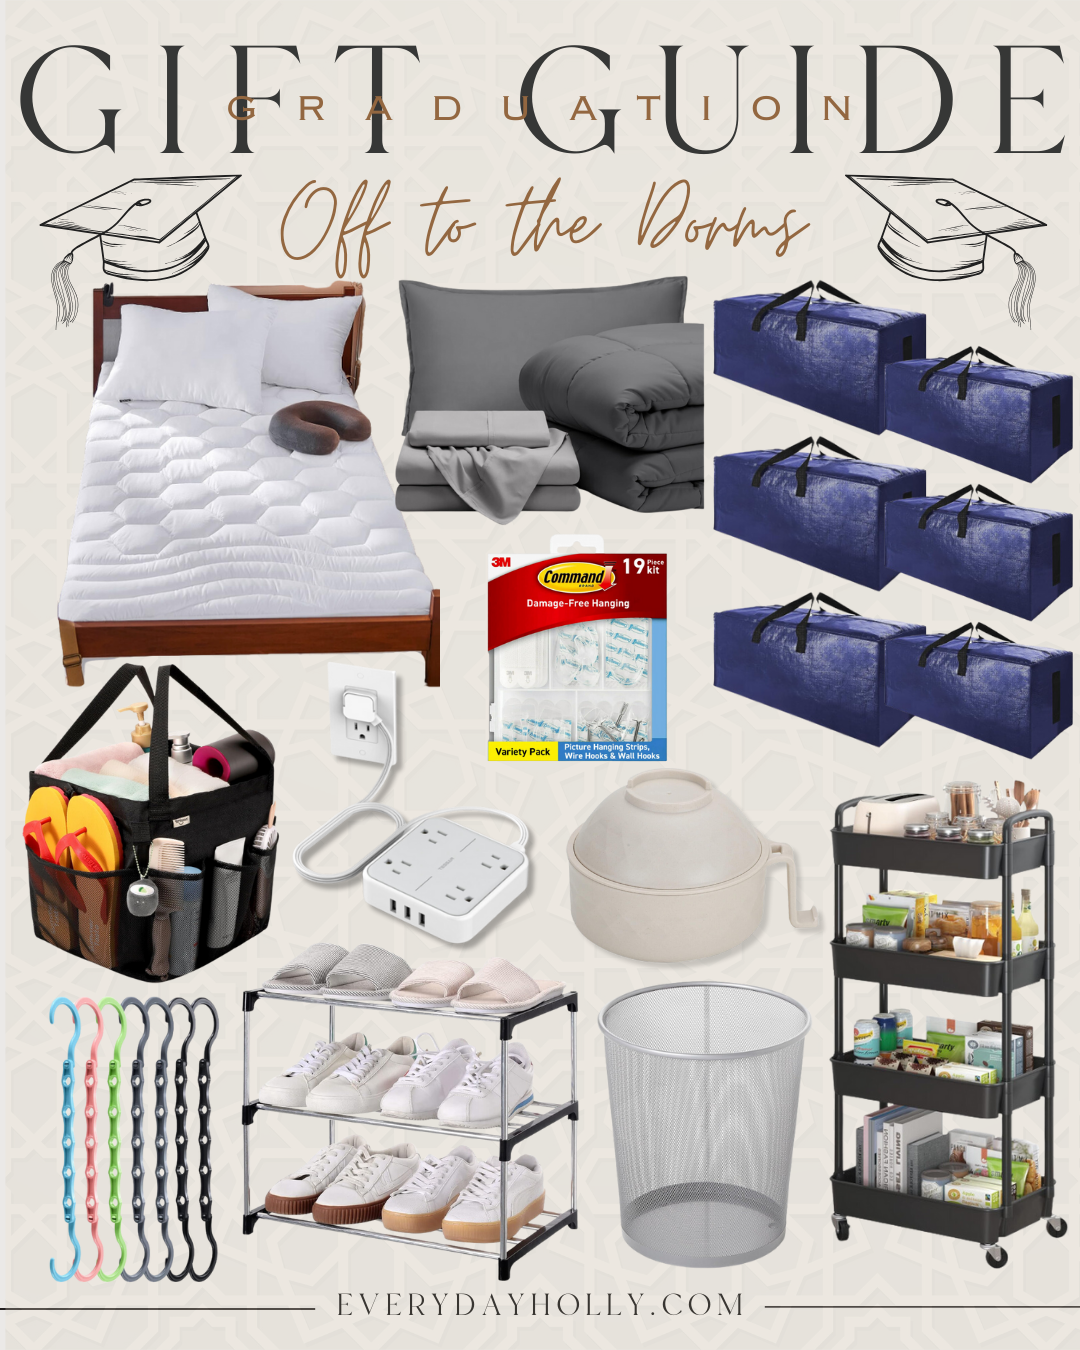 45 gift ideas for the graduate in your life | gift guide, gift ideas, graduation gift, graduate, high school grad, college grad, off to the dorms, college dorm essentials, bedding, space saver, organization, shower caddy, gifts for teen, freshman